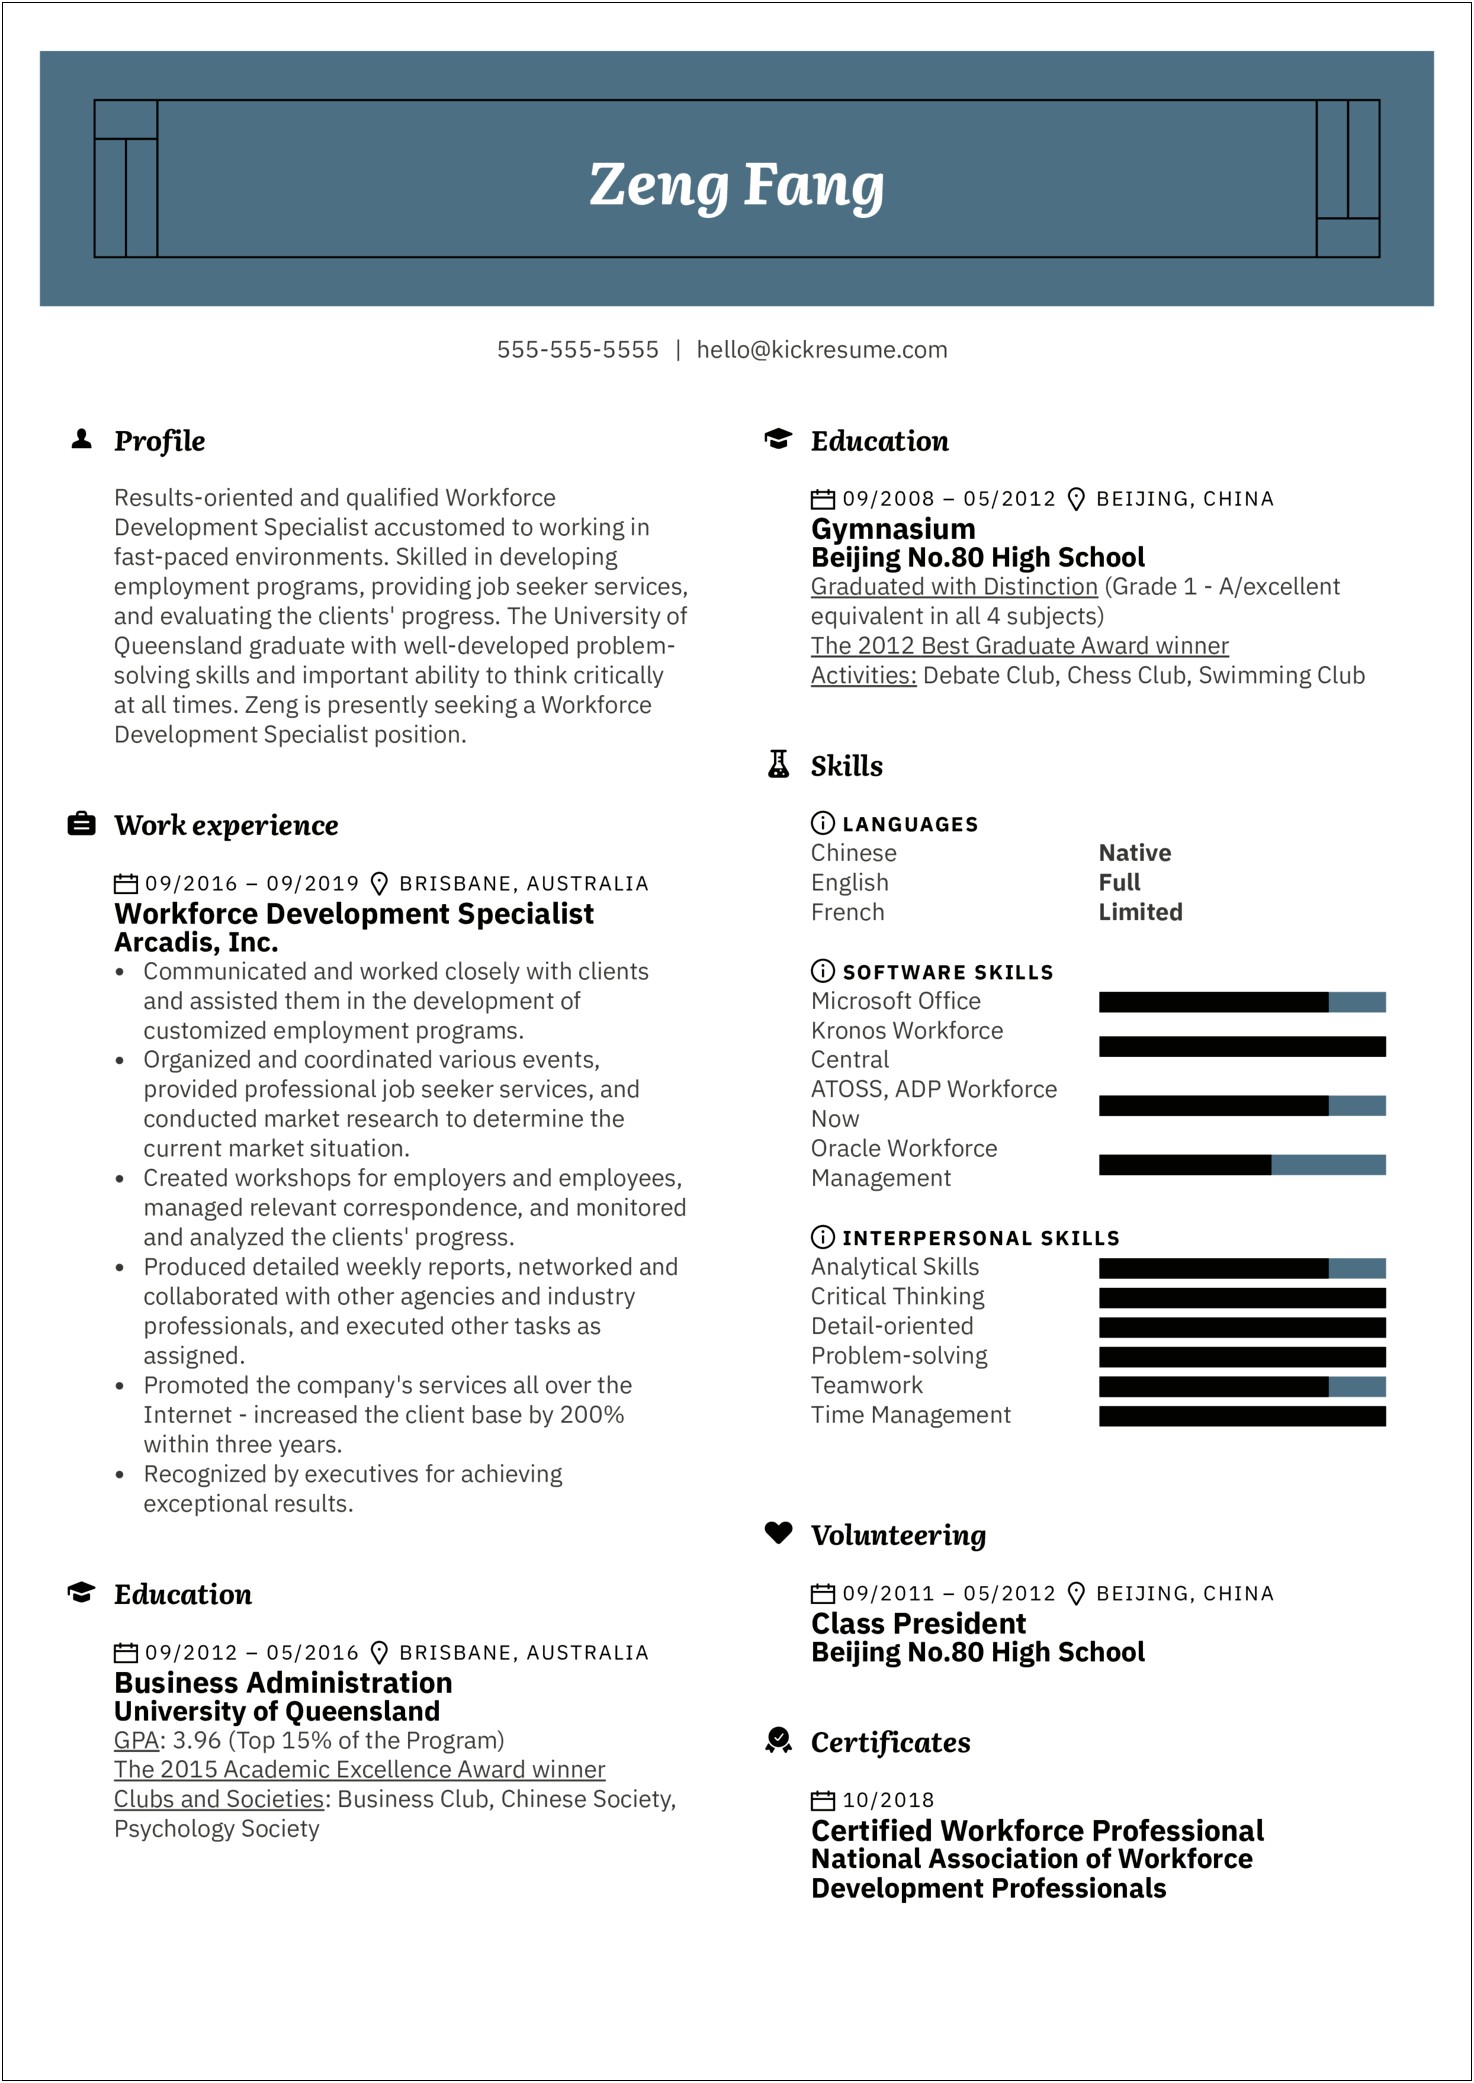 Resume Templates For Experienced Workforce Management